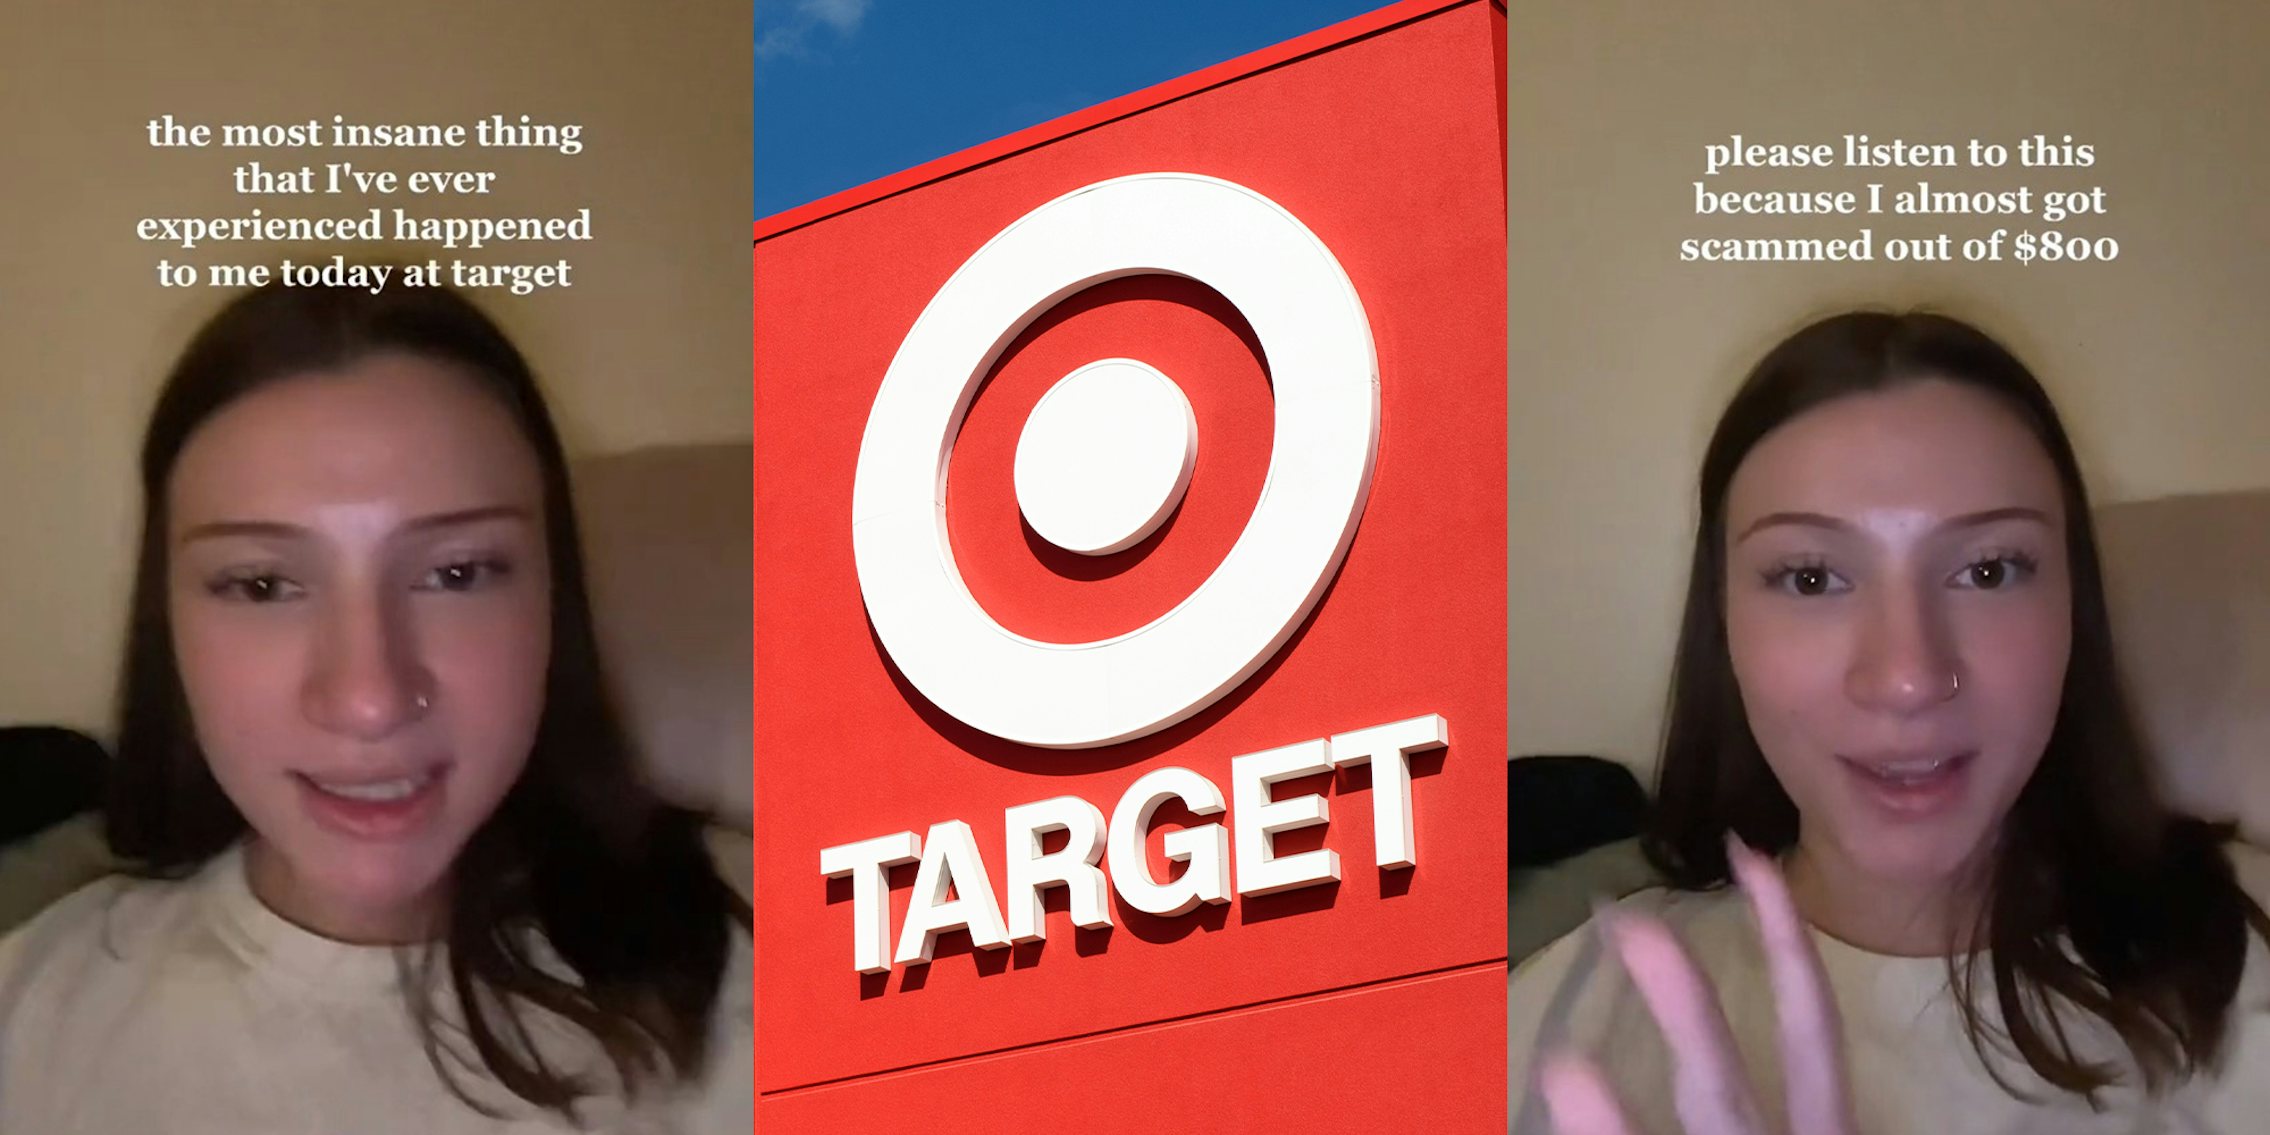 Woman says another customer scammed her out of $800 at Target